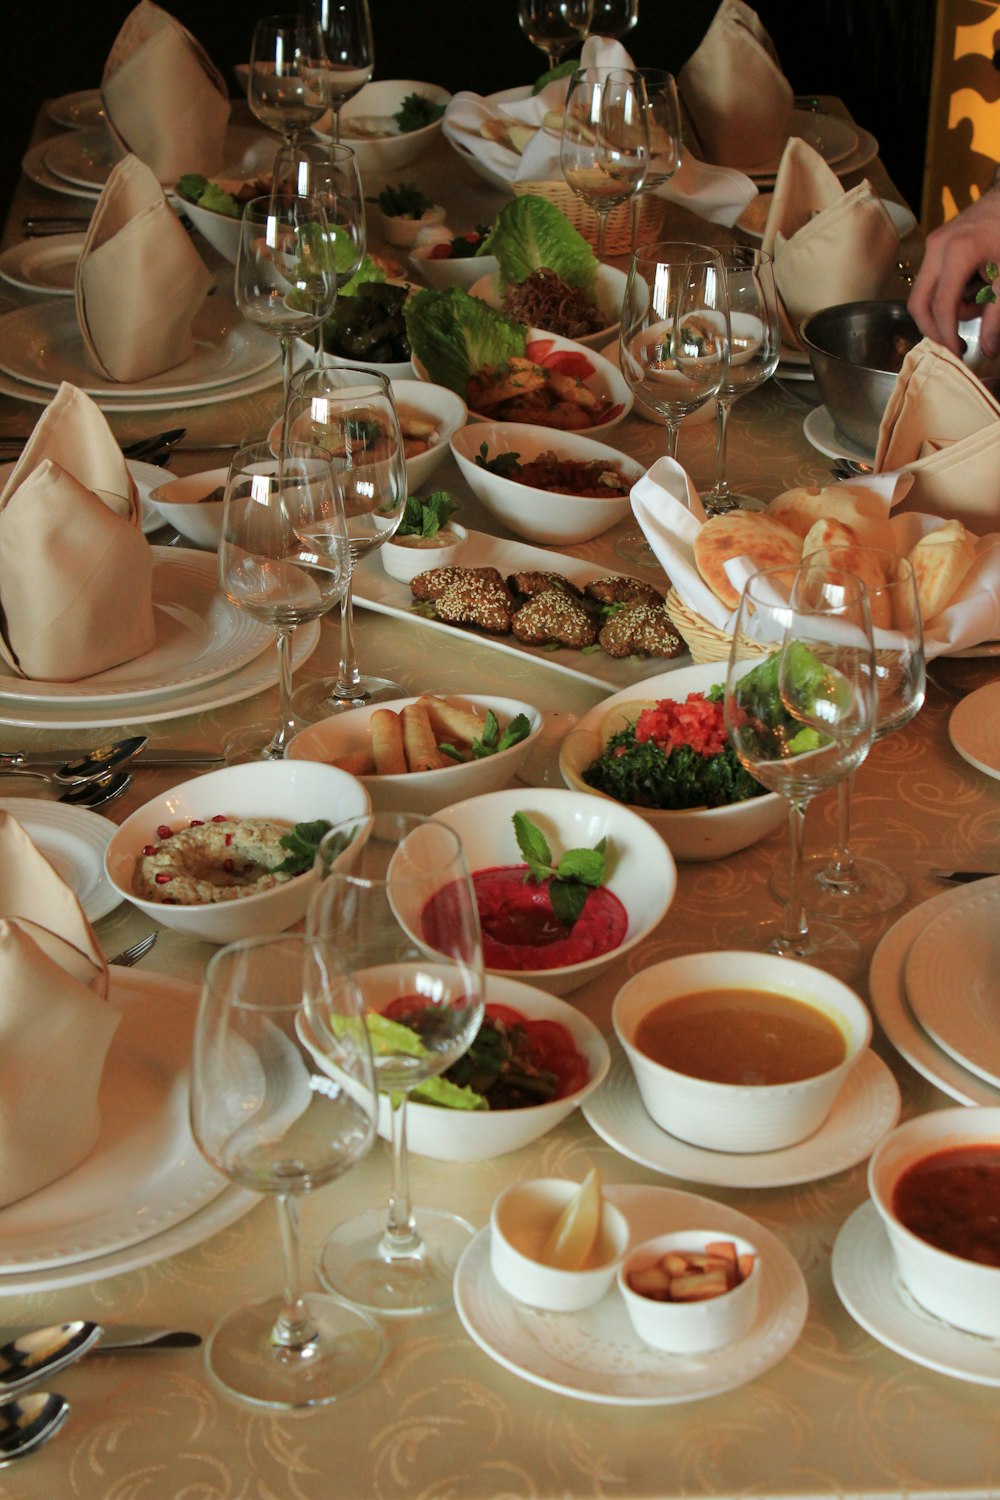 a table filled with plates of food and wine glasses